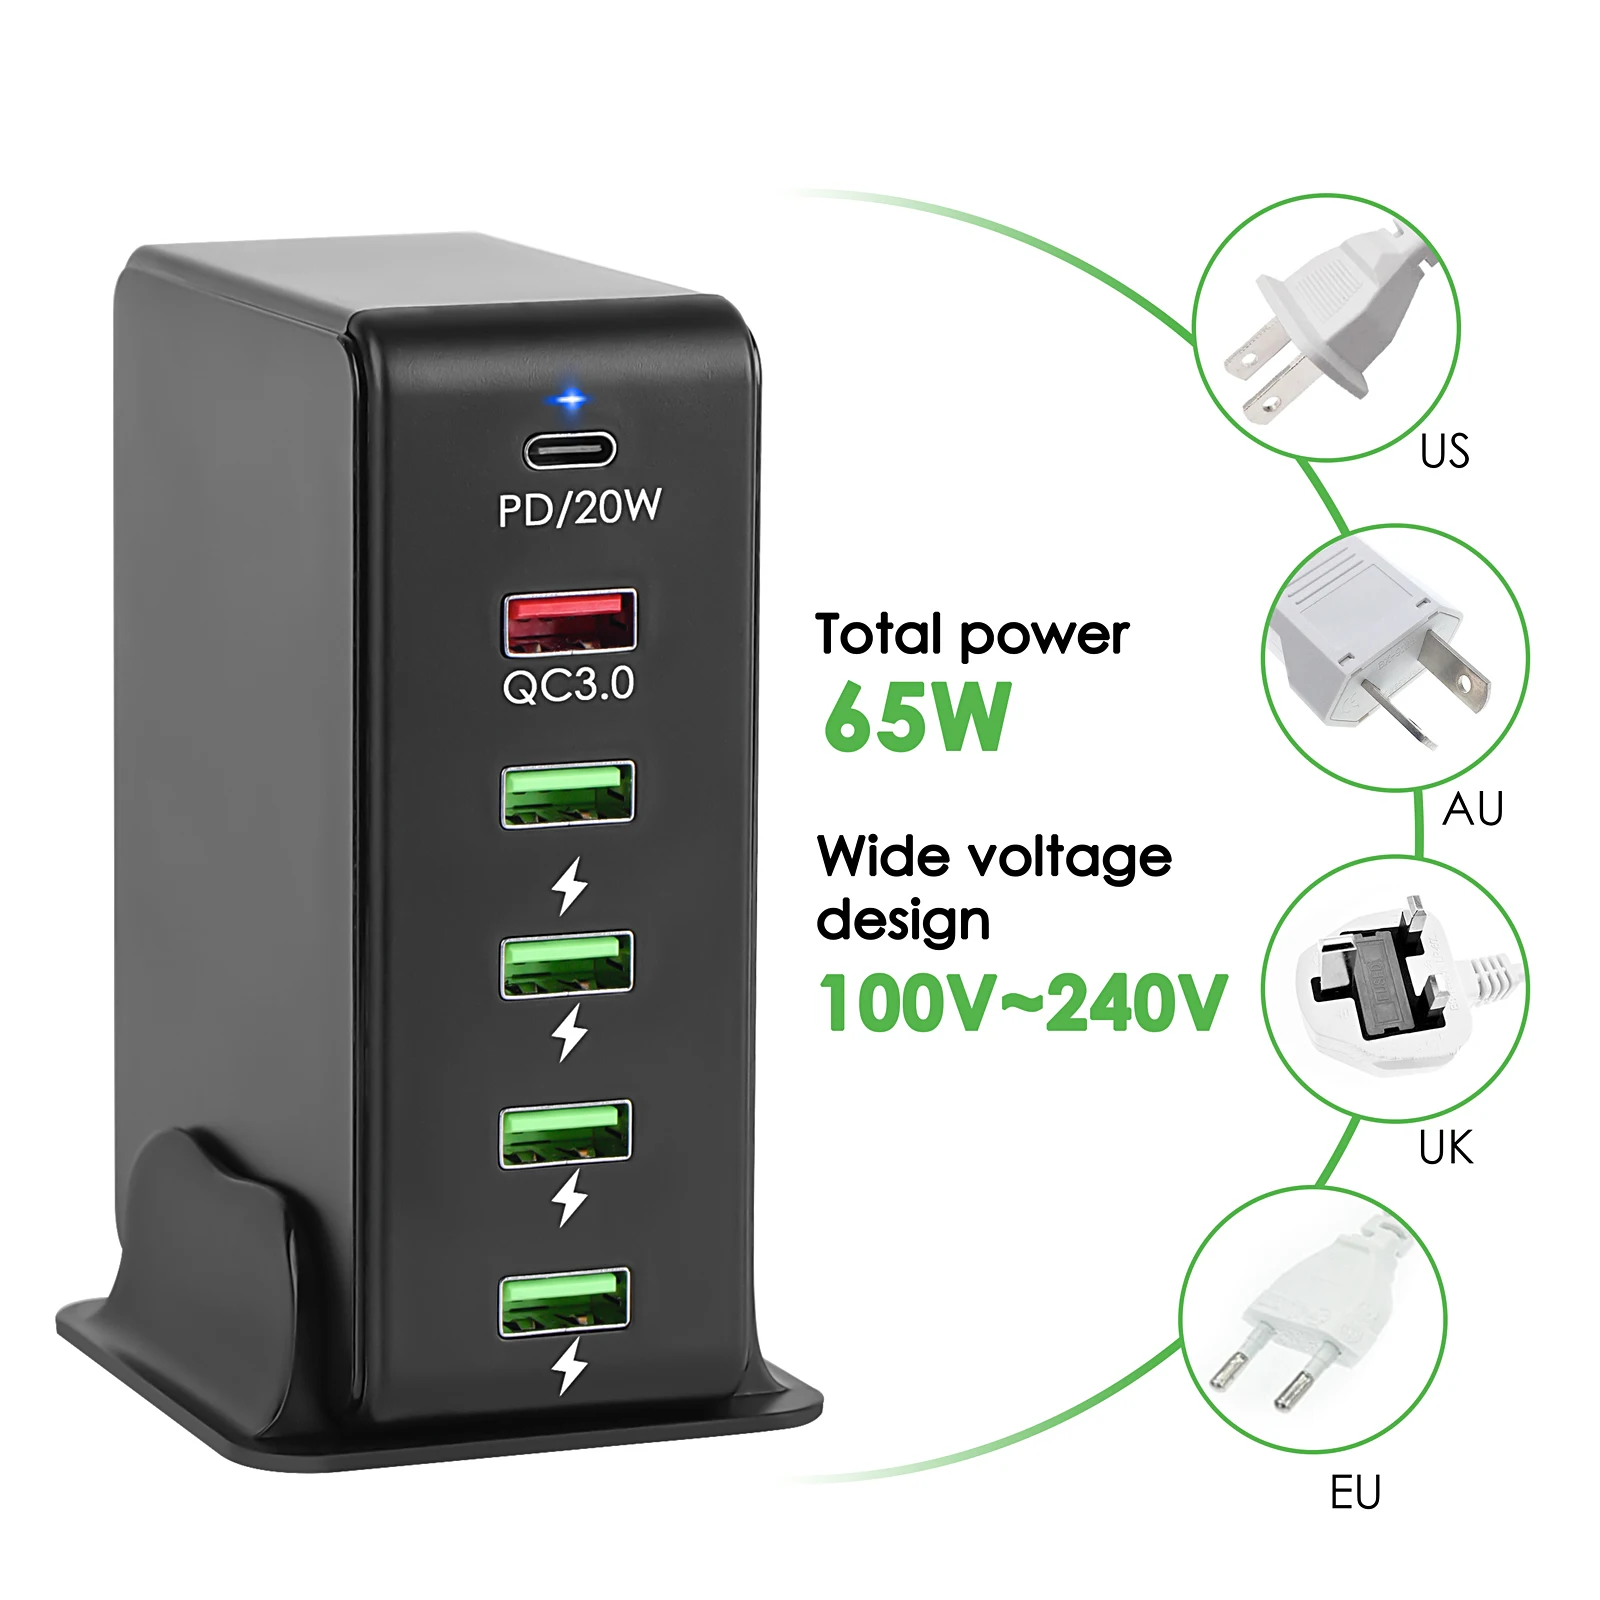 

Universal 65W Super Fast Charger PD 3.0 Charger for iPhone/Macbook QC3.0 USB Type C Fast Charging Multiple Devices Power Adapter